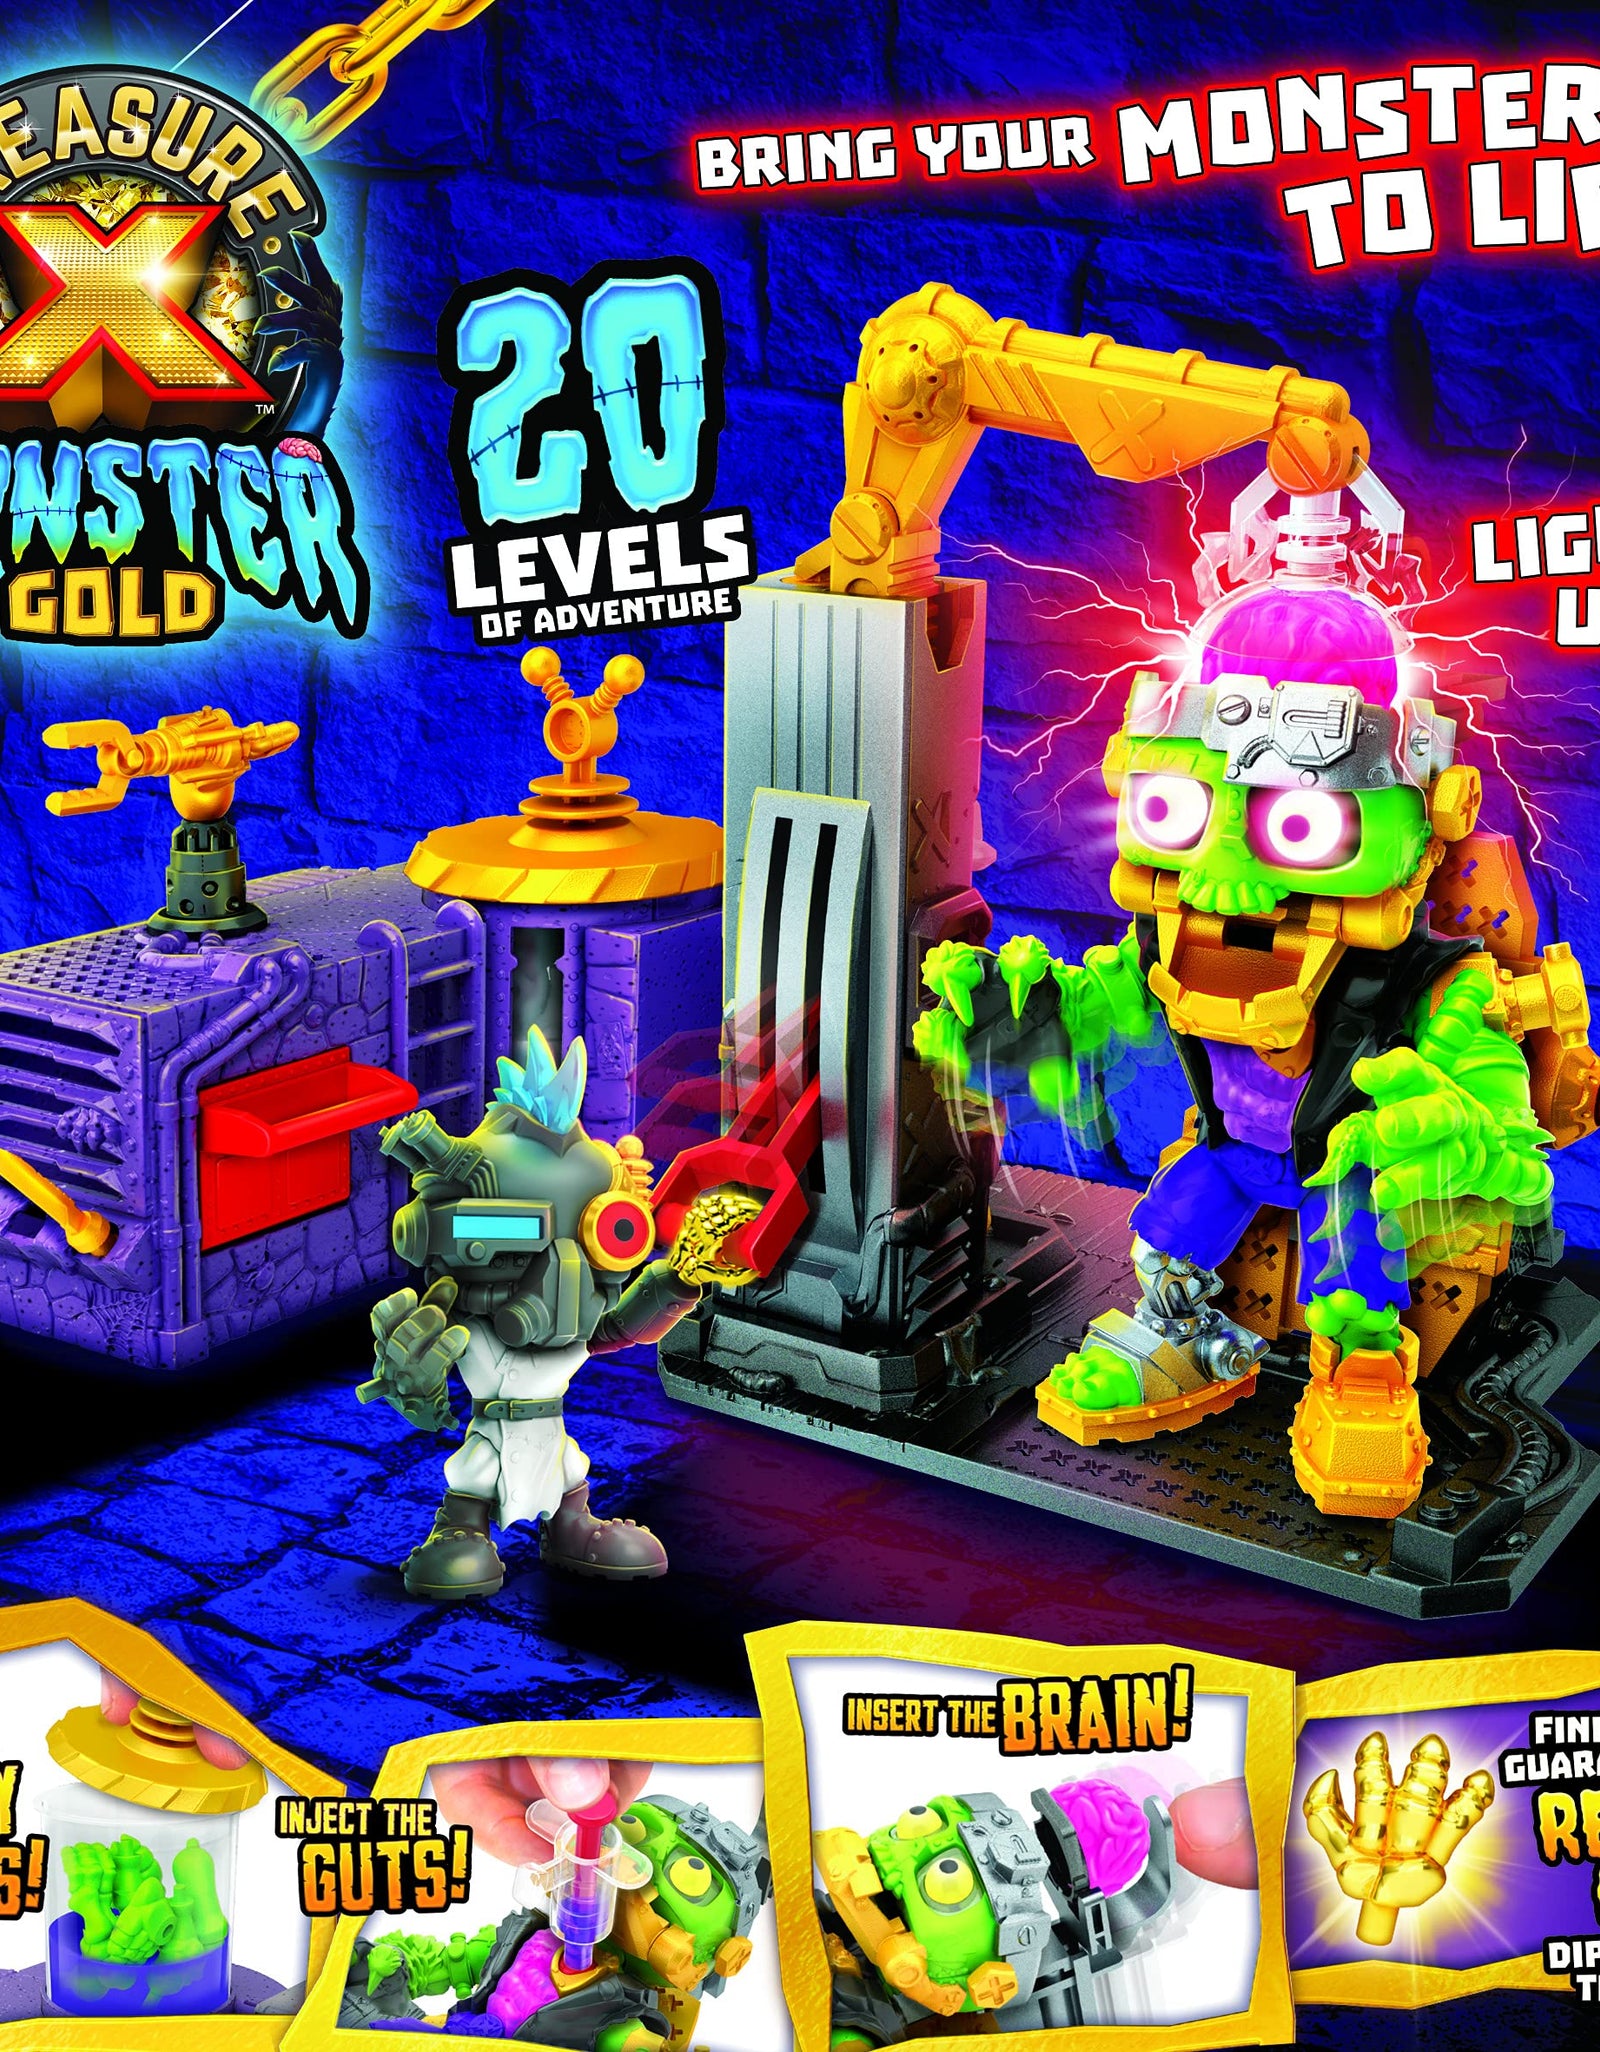 Treasure X Monster Gold - Mega Monster Lab - 20 Levels of Adventure - Will You find Real Gold Dipped Treasure?